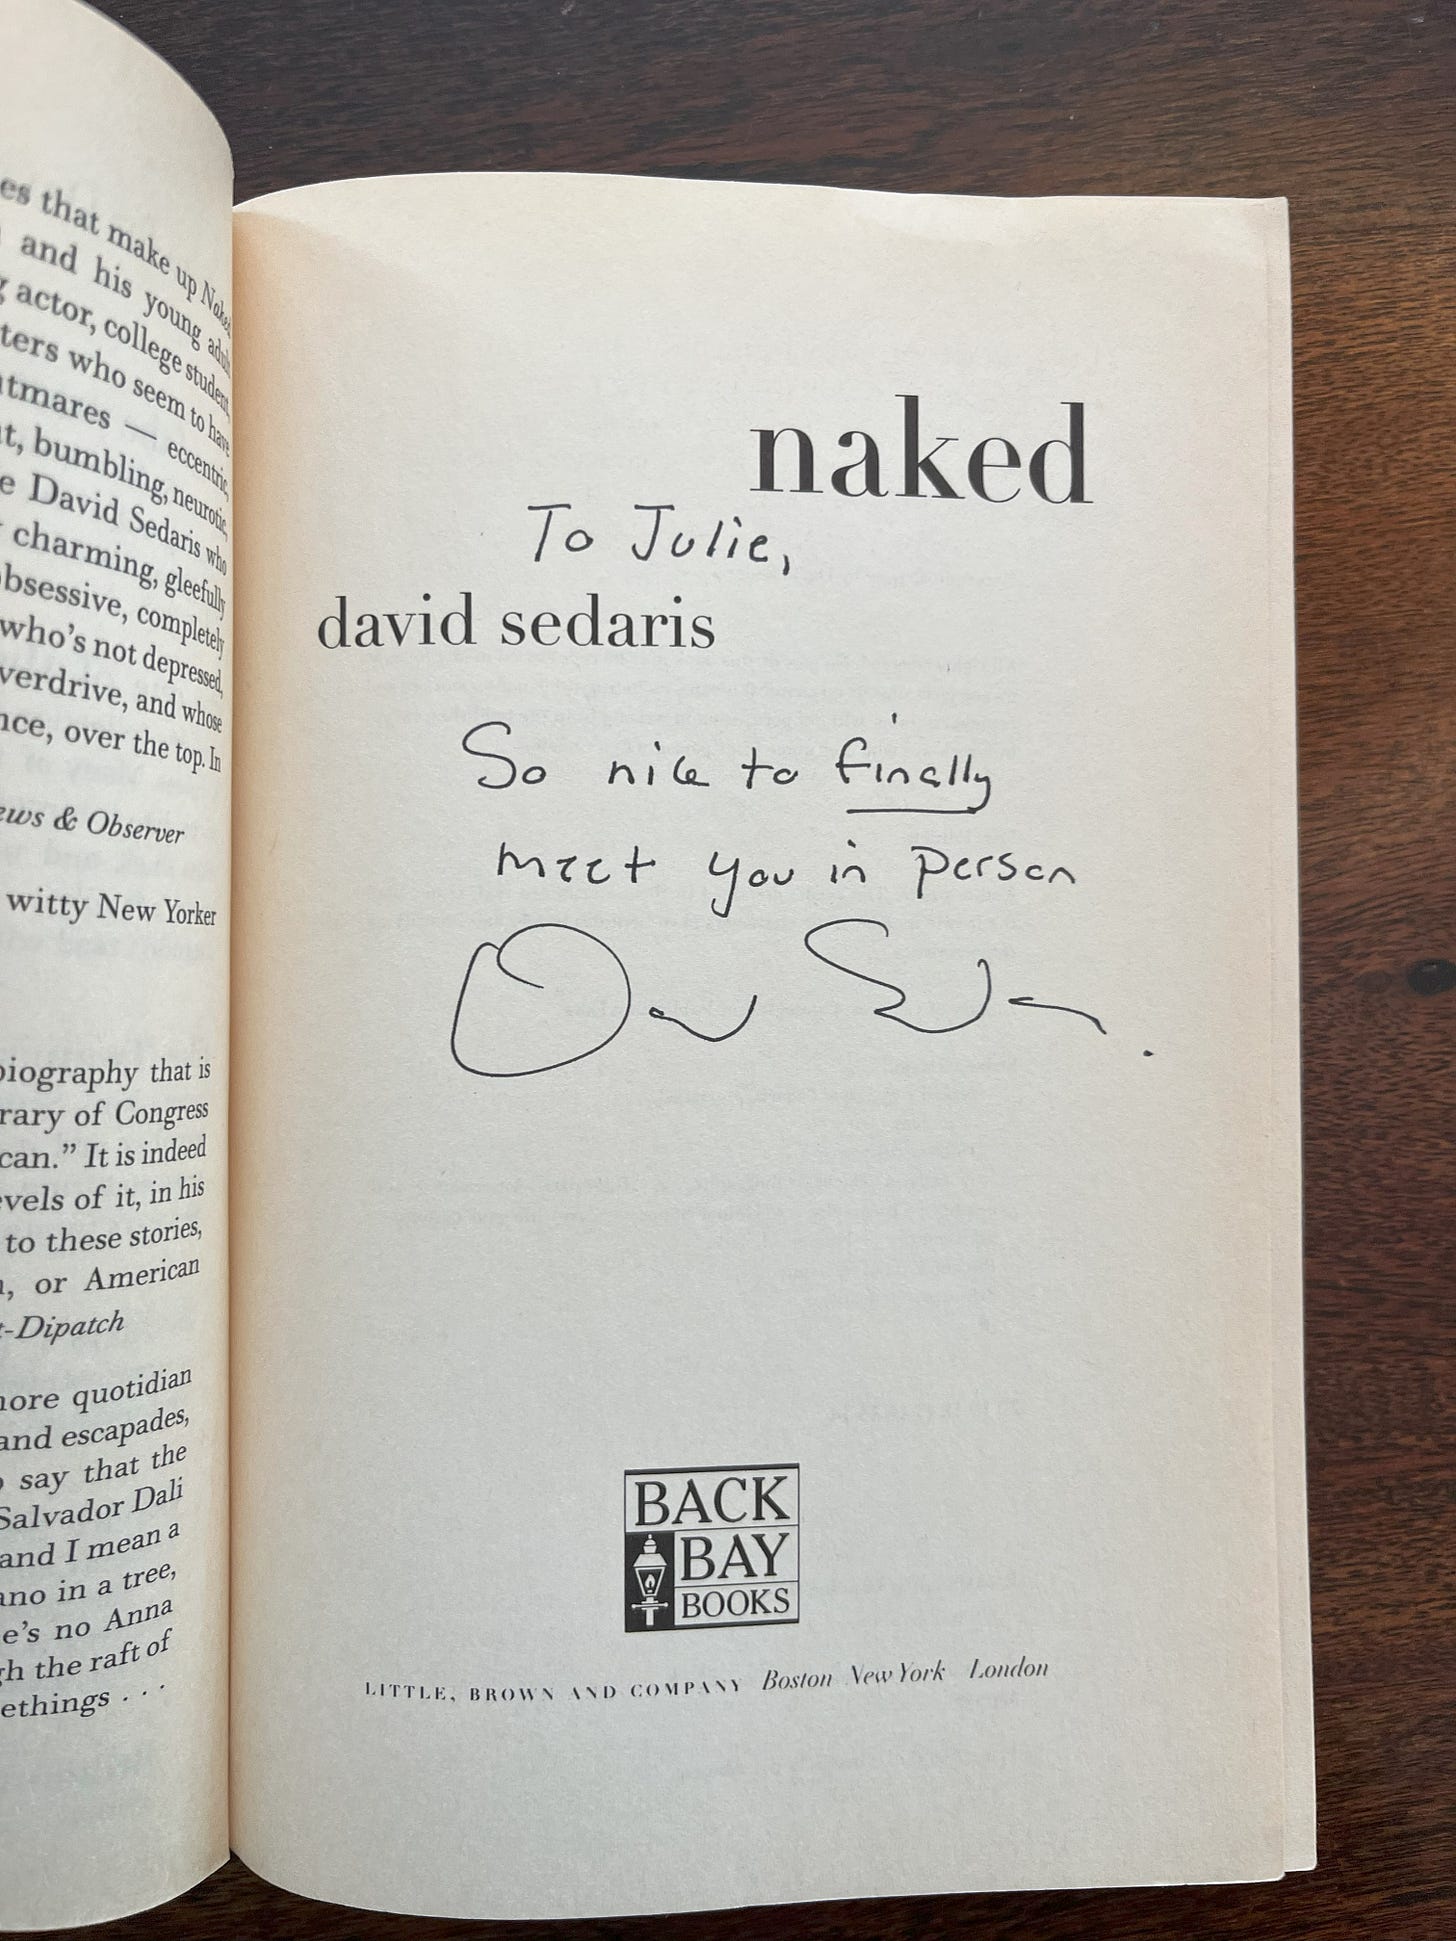 A book inscription in the book Naked by David Sedaris that reads "To Julie, So nice to finally meet you in person!"